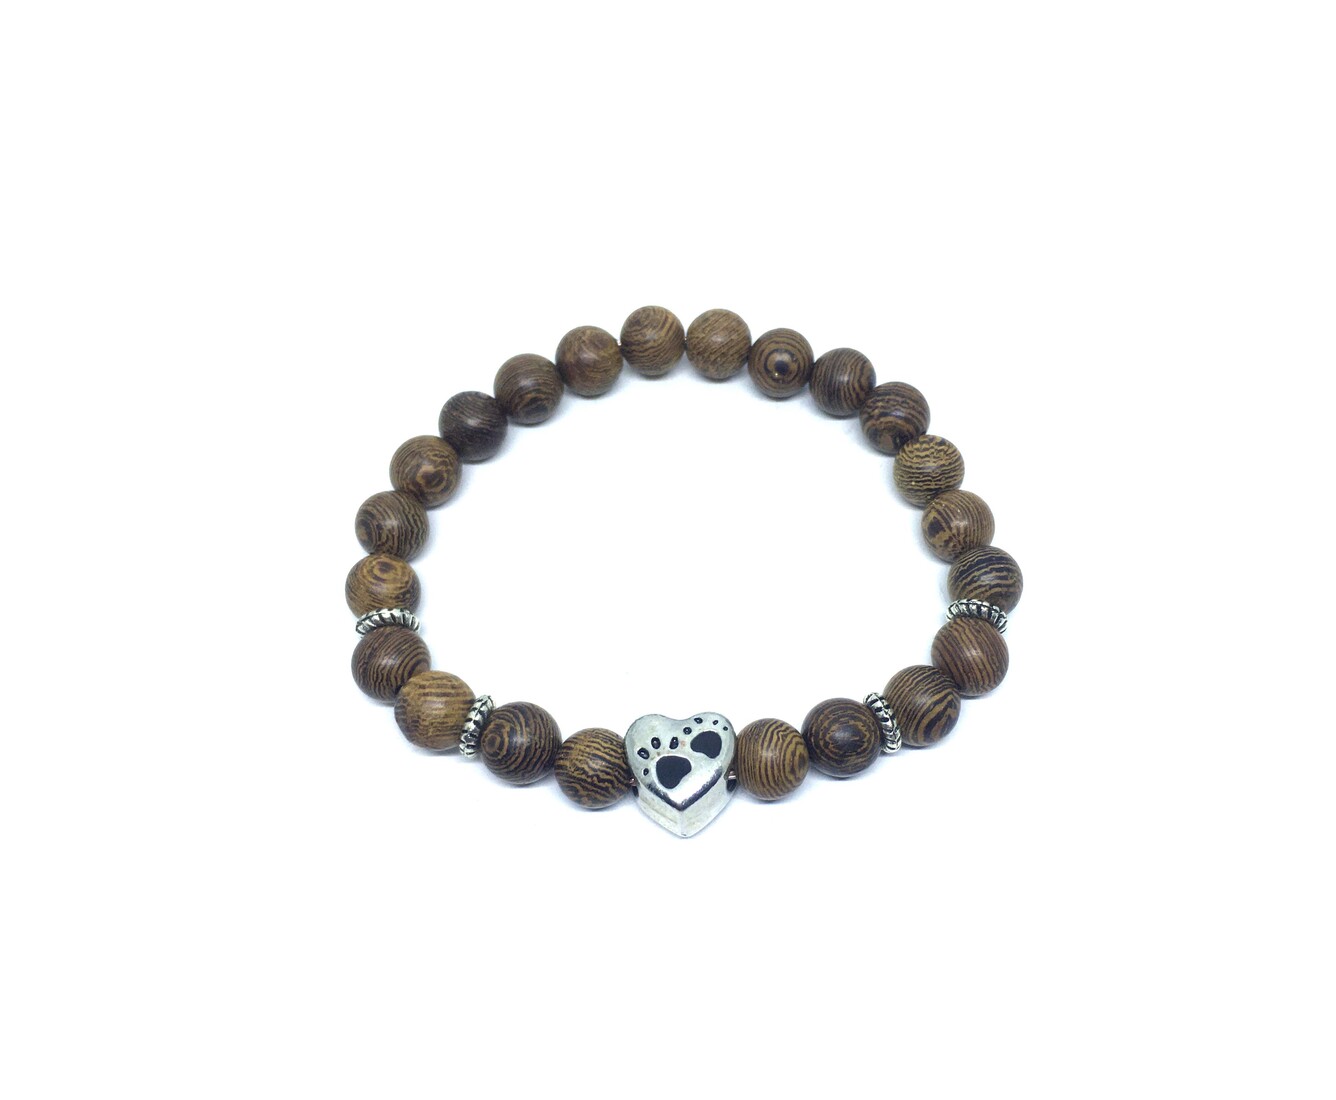 Wooden Bracelet with Paw Print Charm